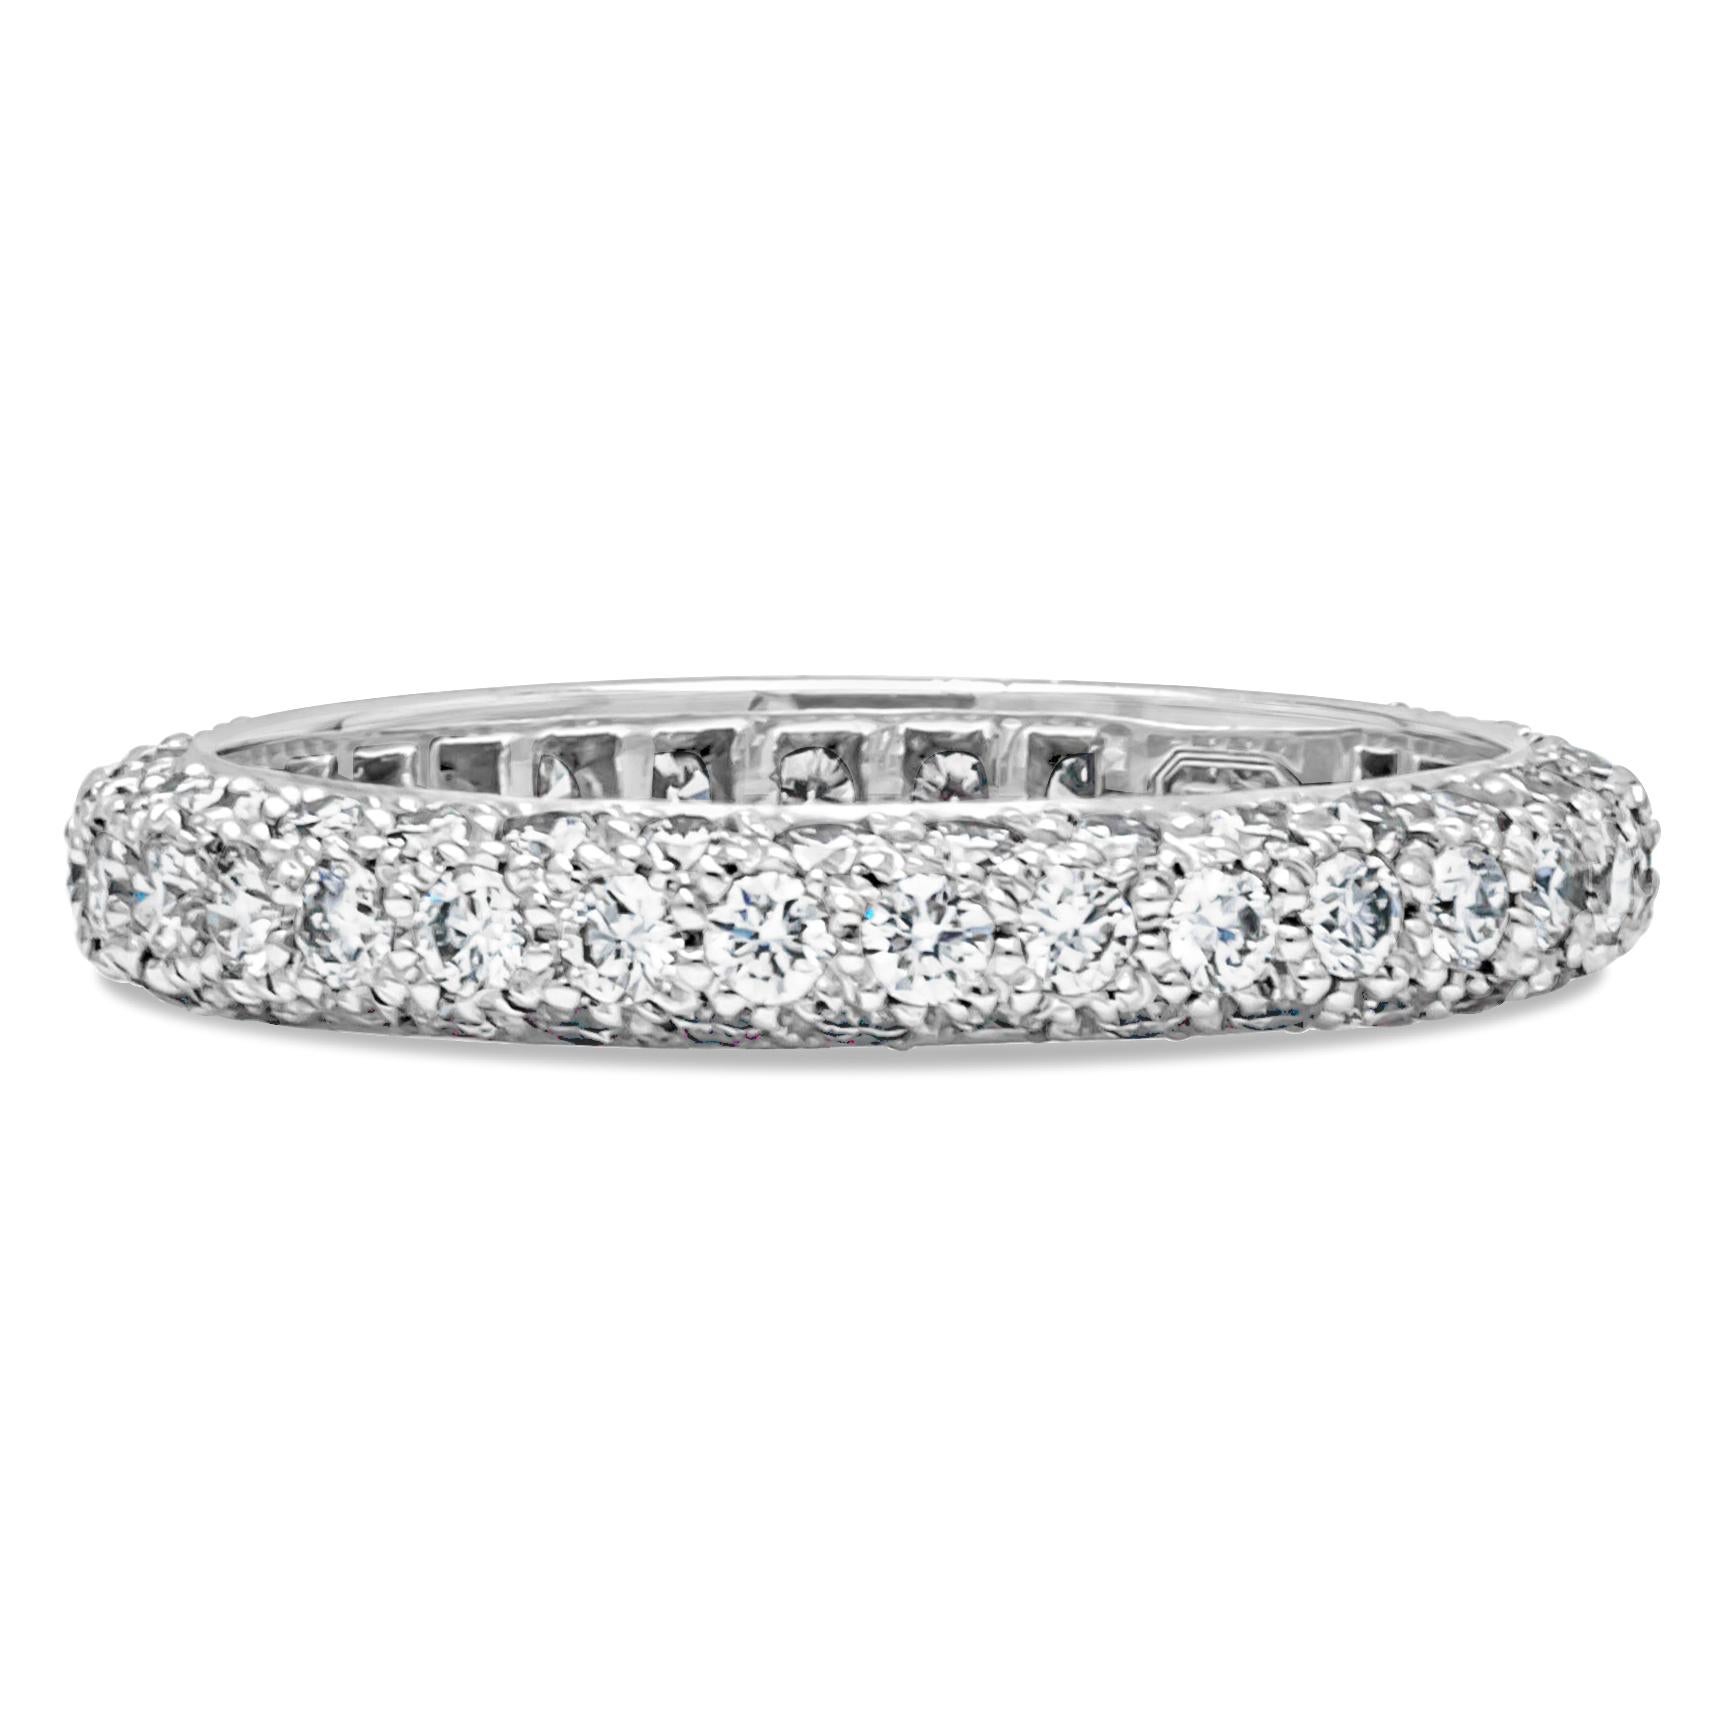 A classic diamond eternity wedding band by Harry Winston showcasing a multi-row circle of 99 brilliant round cut diamonds set in a micro-pave dome platinum setting weighing 1.08 carats total, D-E-F color, VS+ in clarity. Size 5 US and 3mm in width.